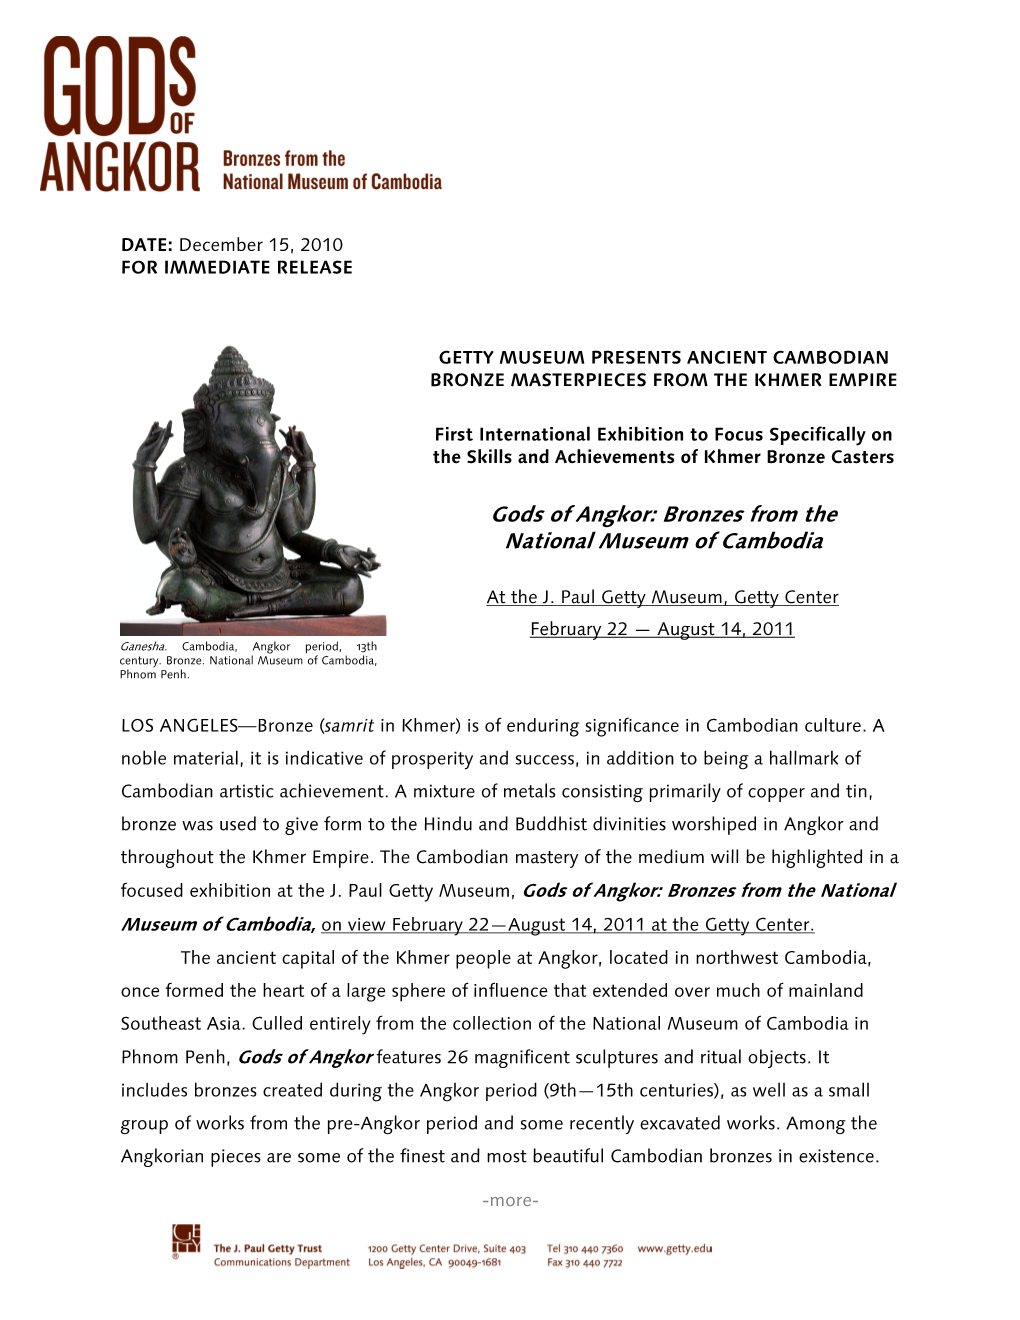 Gods of Angkor: Bronzes from the National Museum of Cambodia